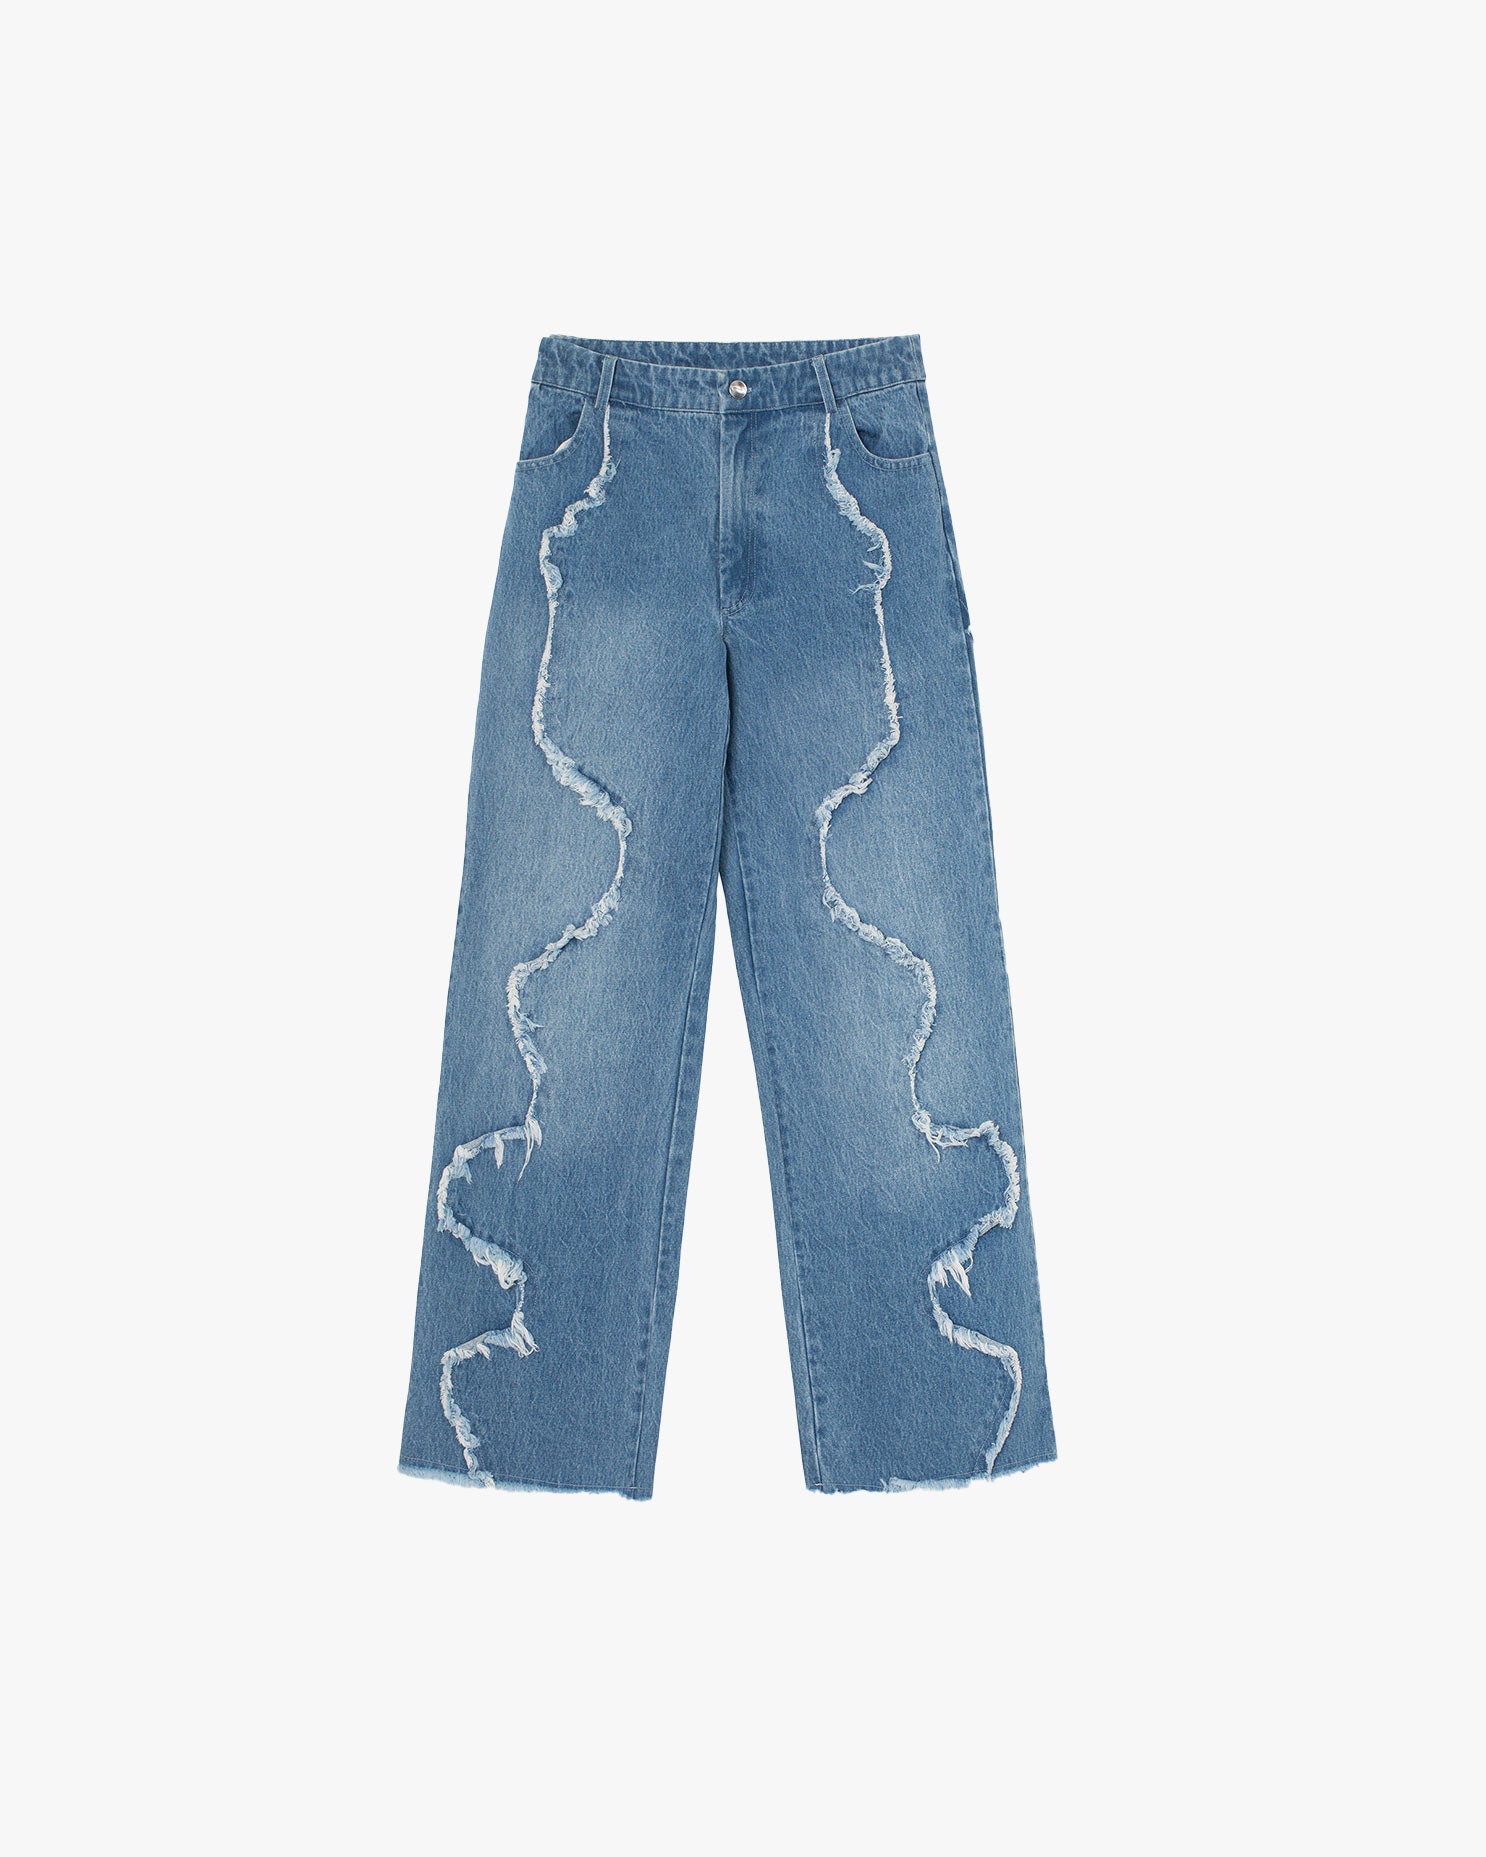 AlistairRS Trousers in Washed Denim